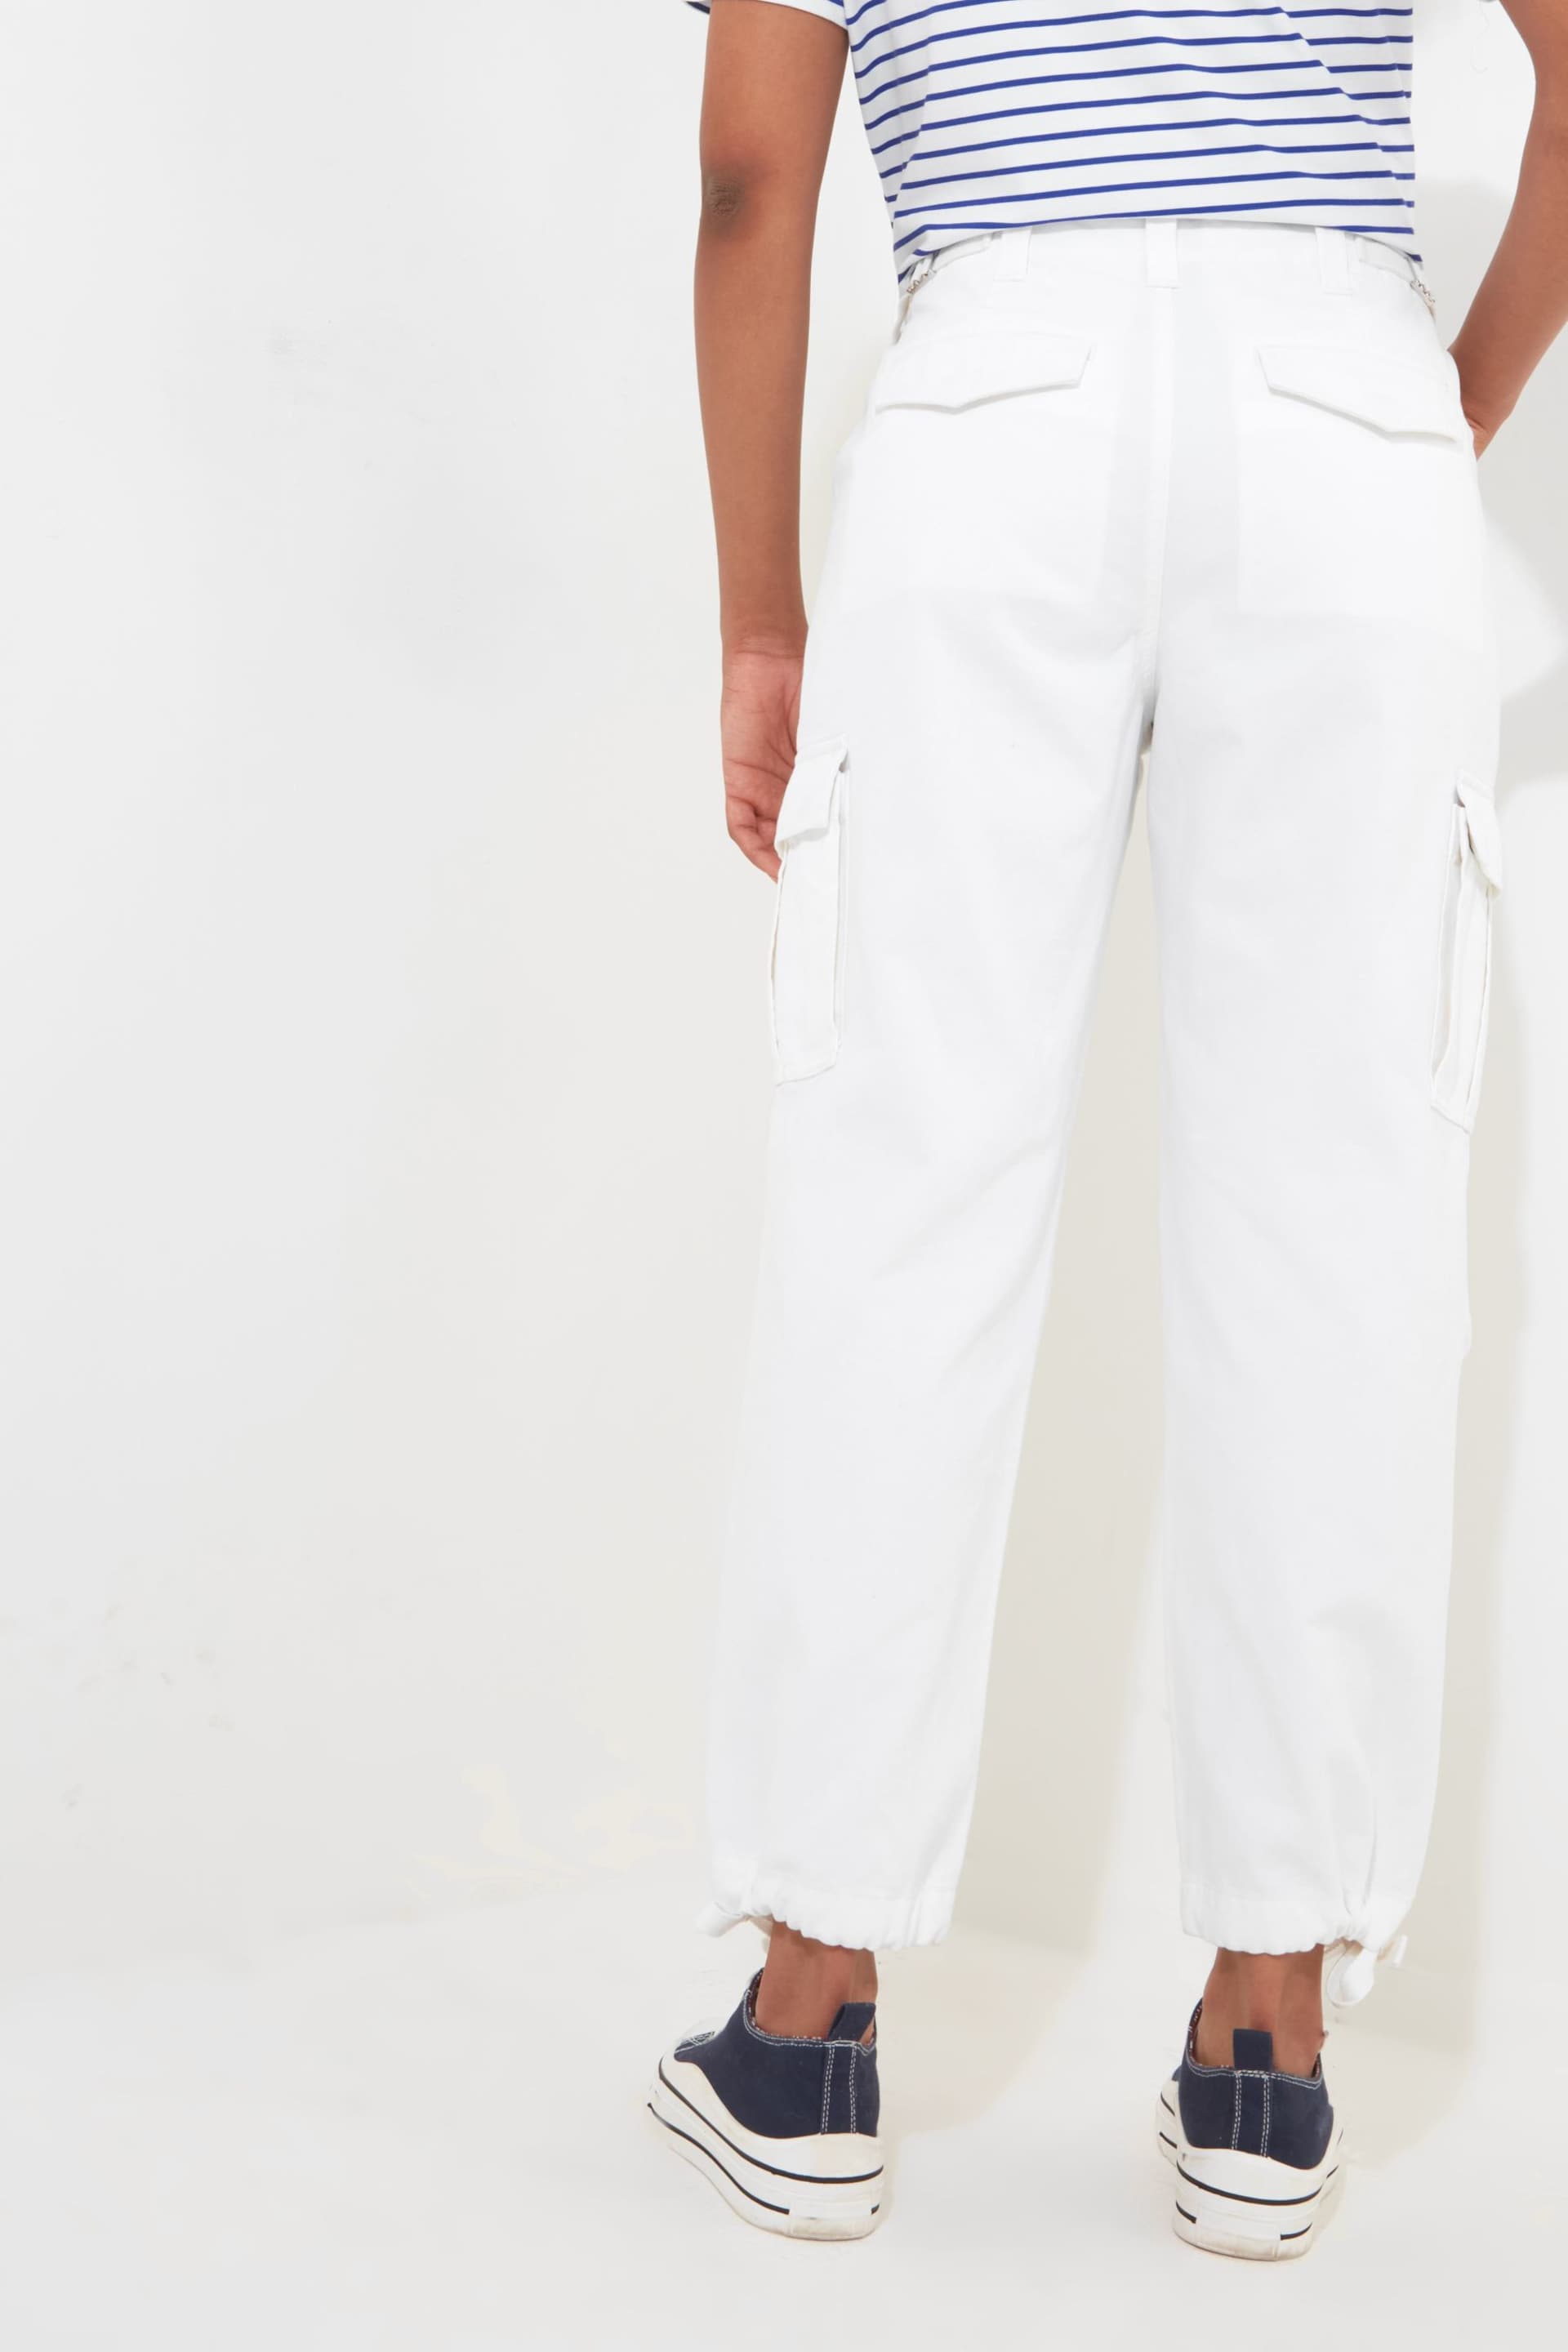 Joe Browns White Relaxed Fit Cargo Trousers - Image 3 of 5